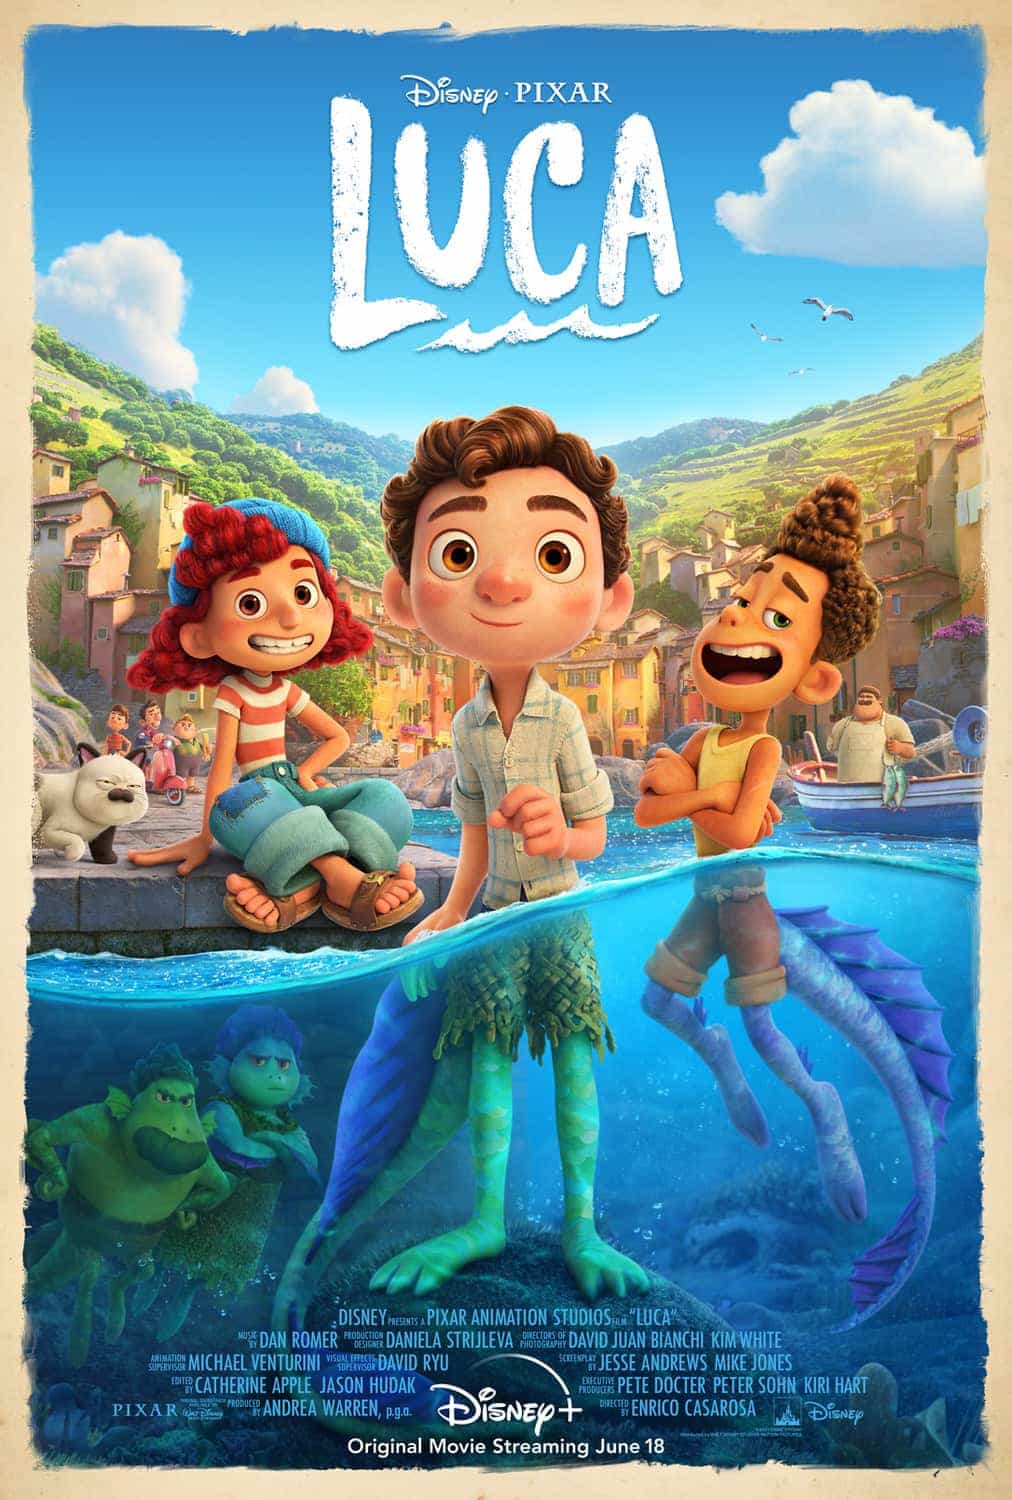 First trailer for upcoming Disney/Pixar movie Luca - movie released June 18th